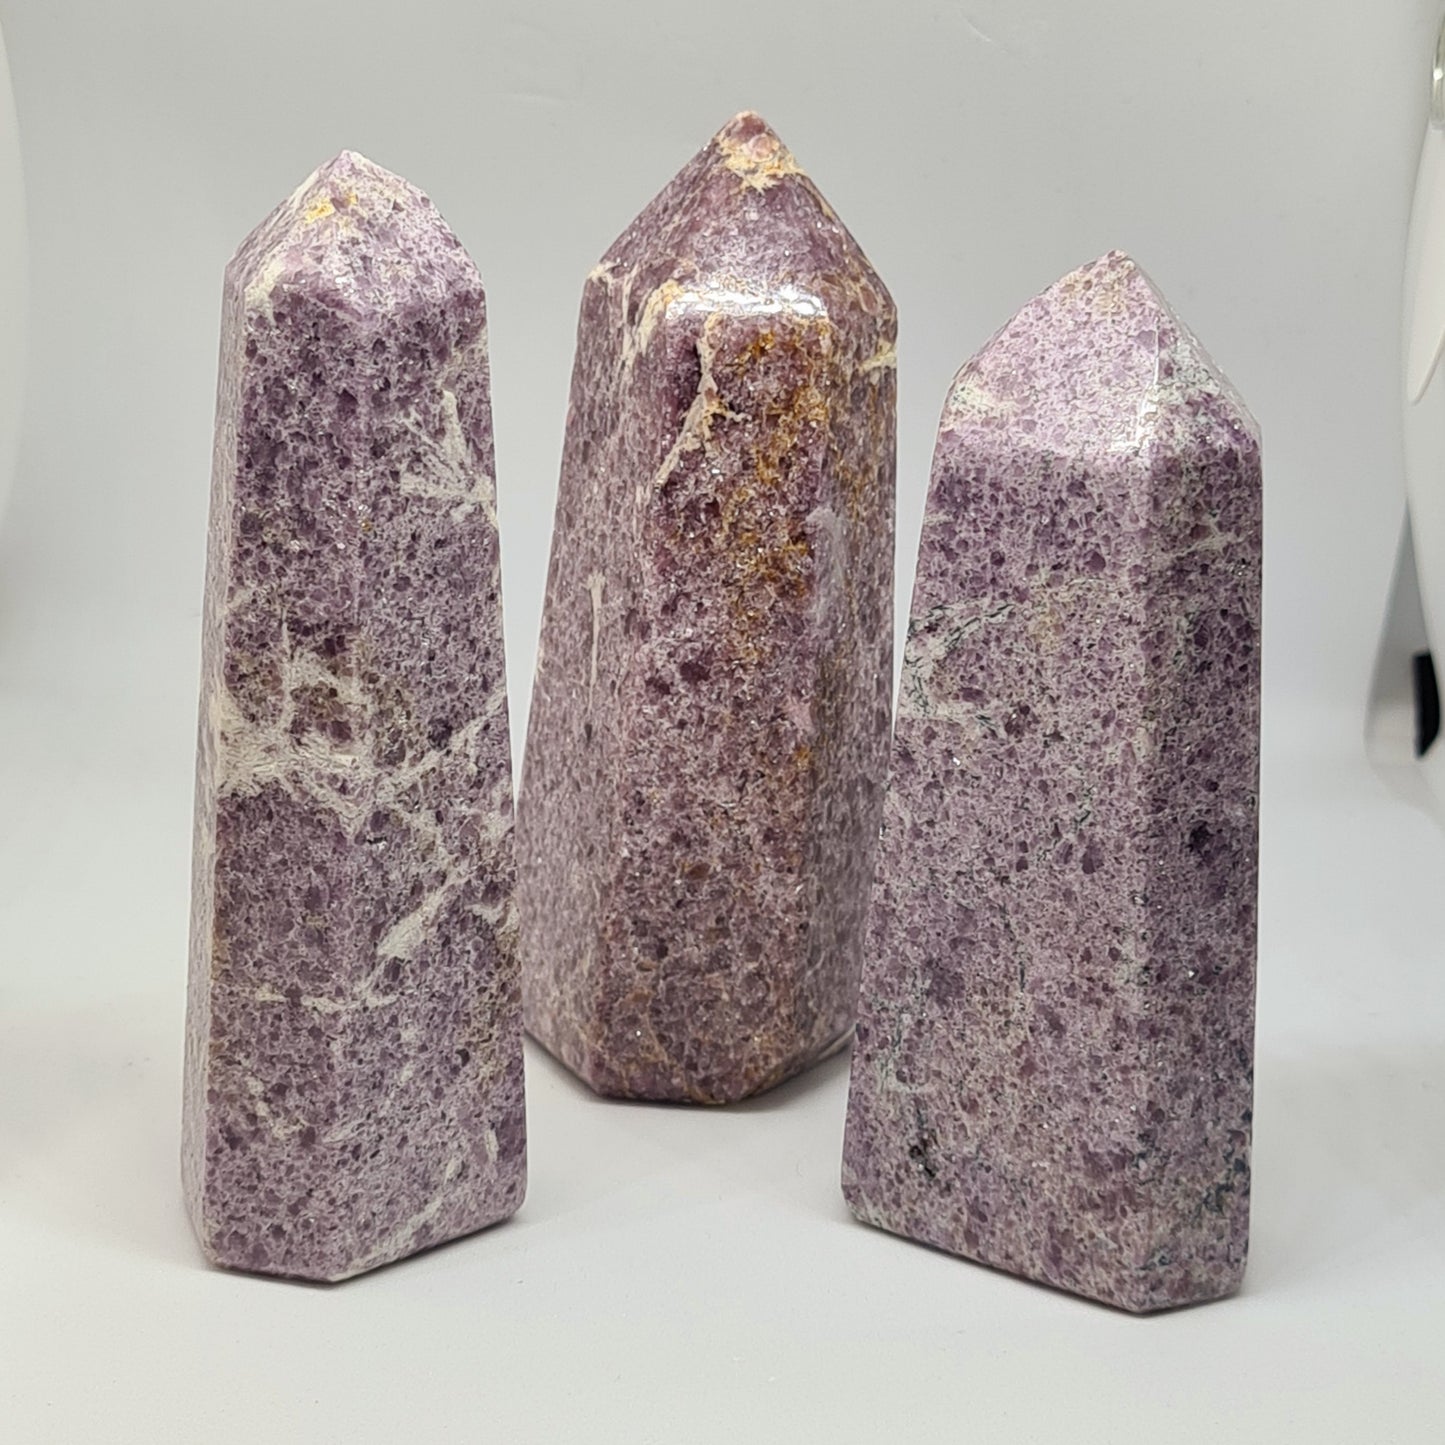 Three glittering lilac lepidolite / purple mica towers on White background